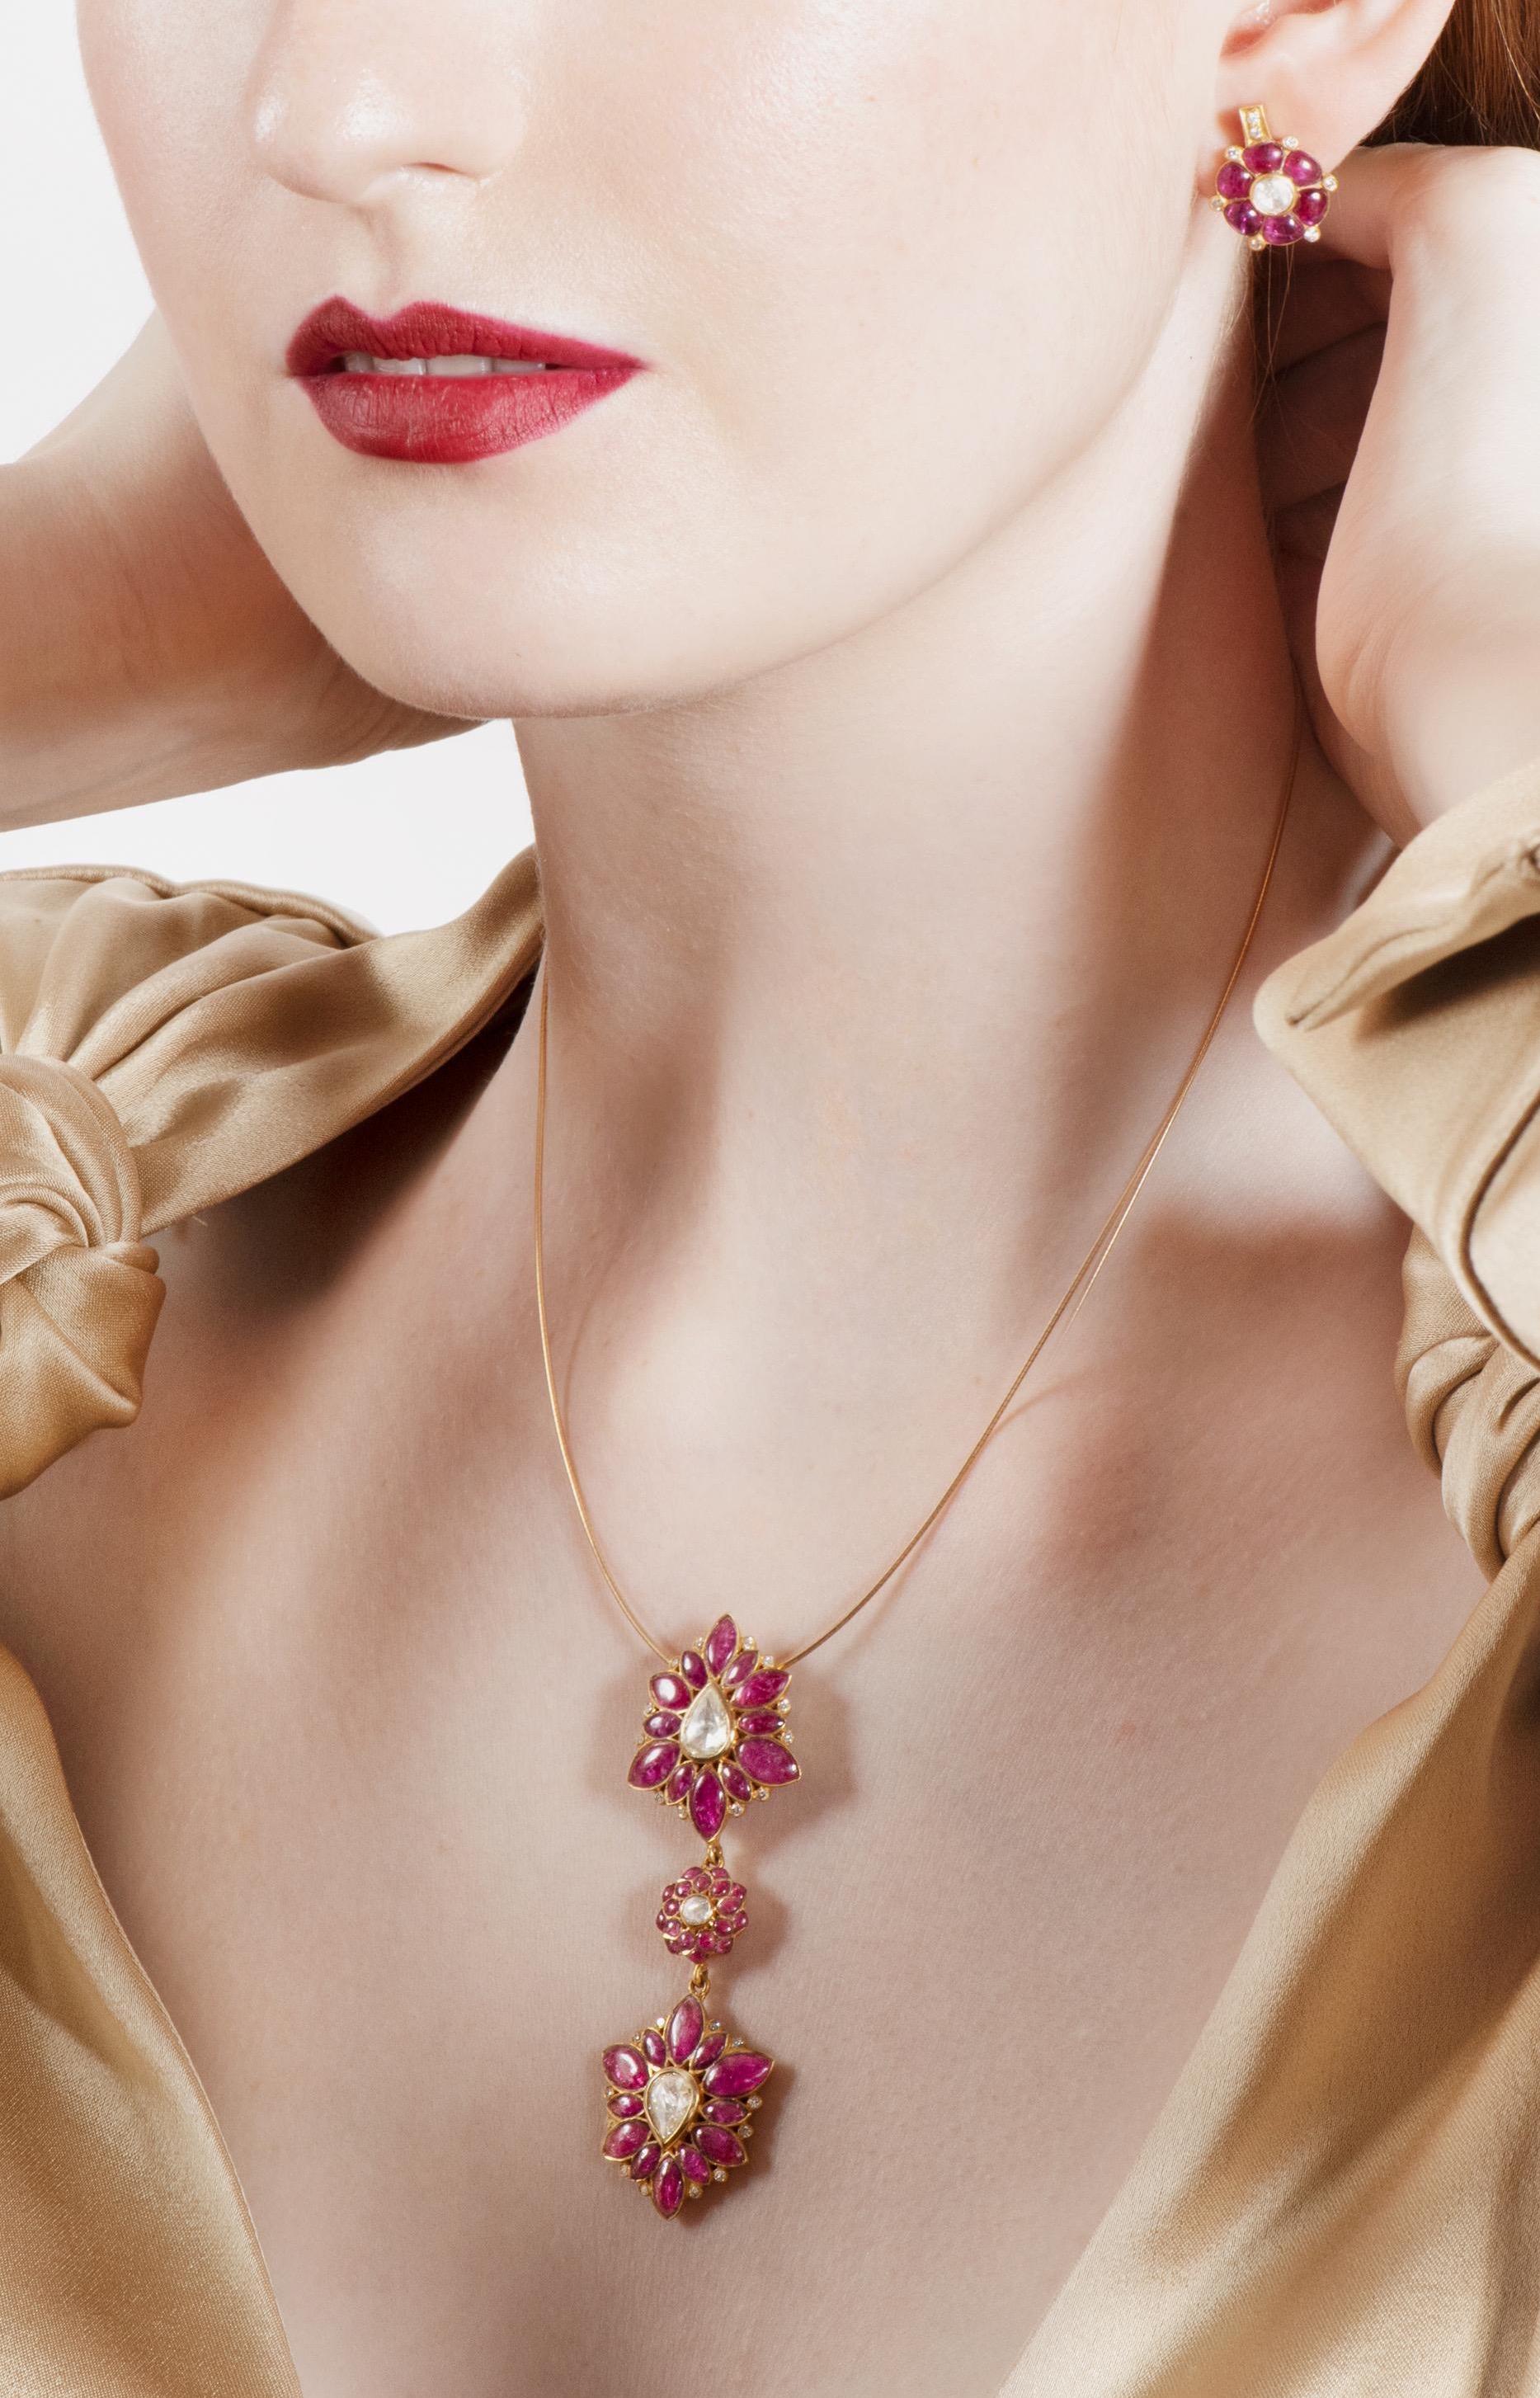 Diamond weight: 0.26 carats
Rose-cut Diamond weight: 0.99 carats
Ruby weight: 8.51 carats

Two sparkling rose-cut teardrop diamonds are framed by marquise-cut rubies and  interspersed with full-cut diamonds.  Linked by a pretty floral motif the